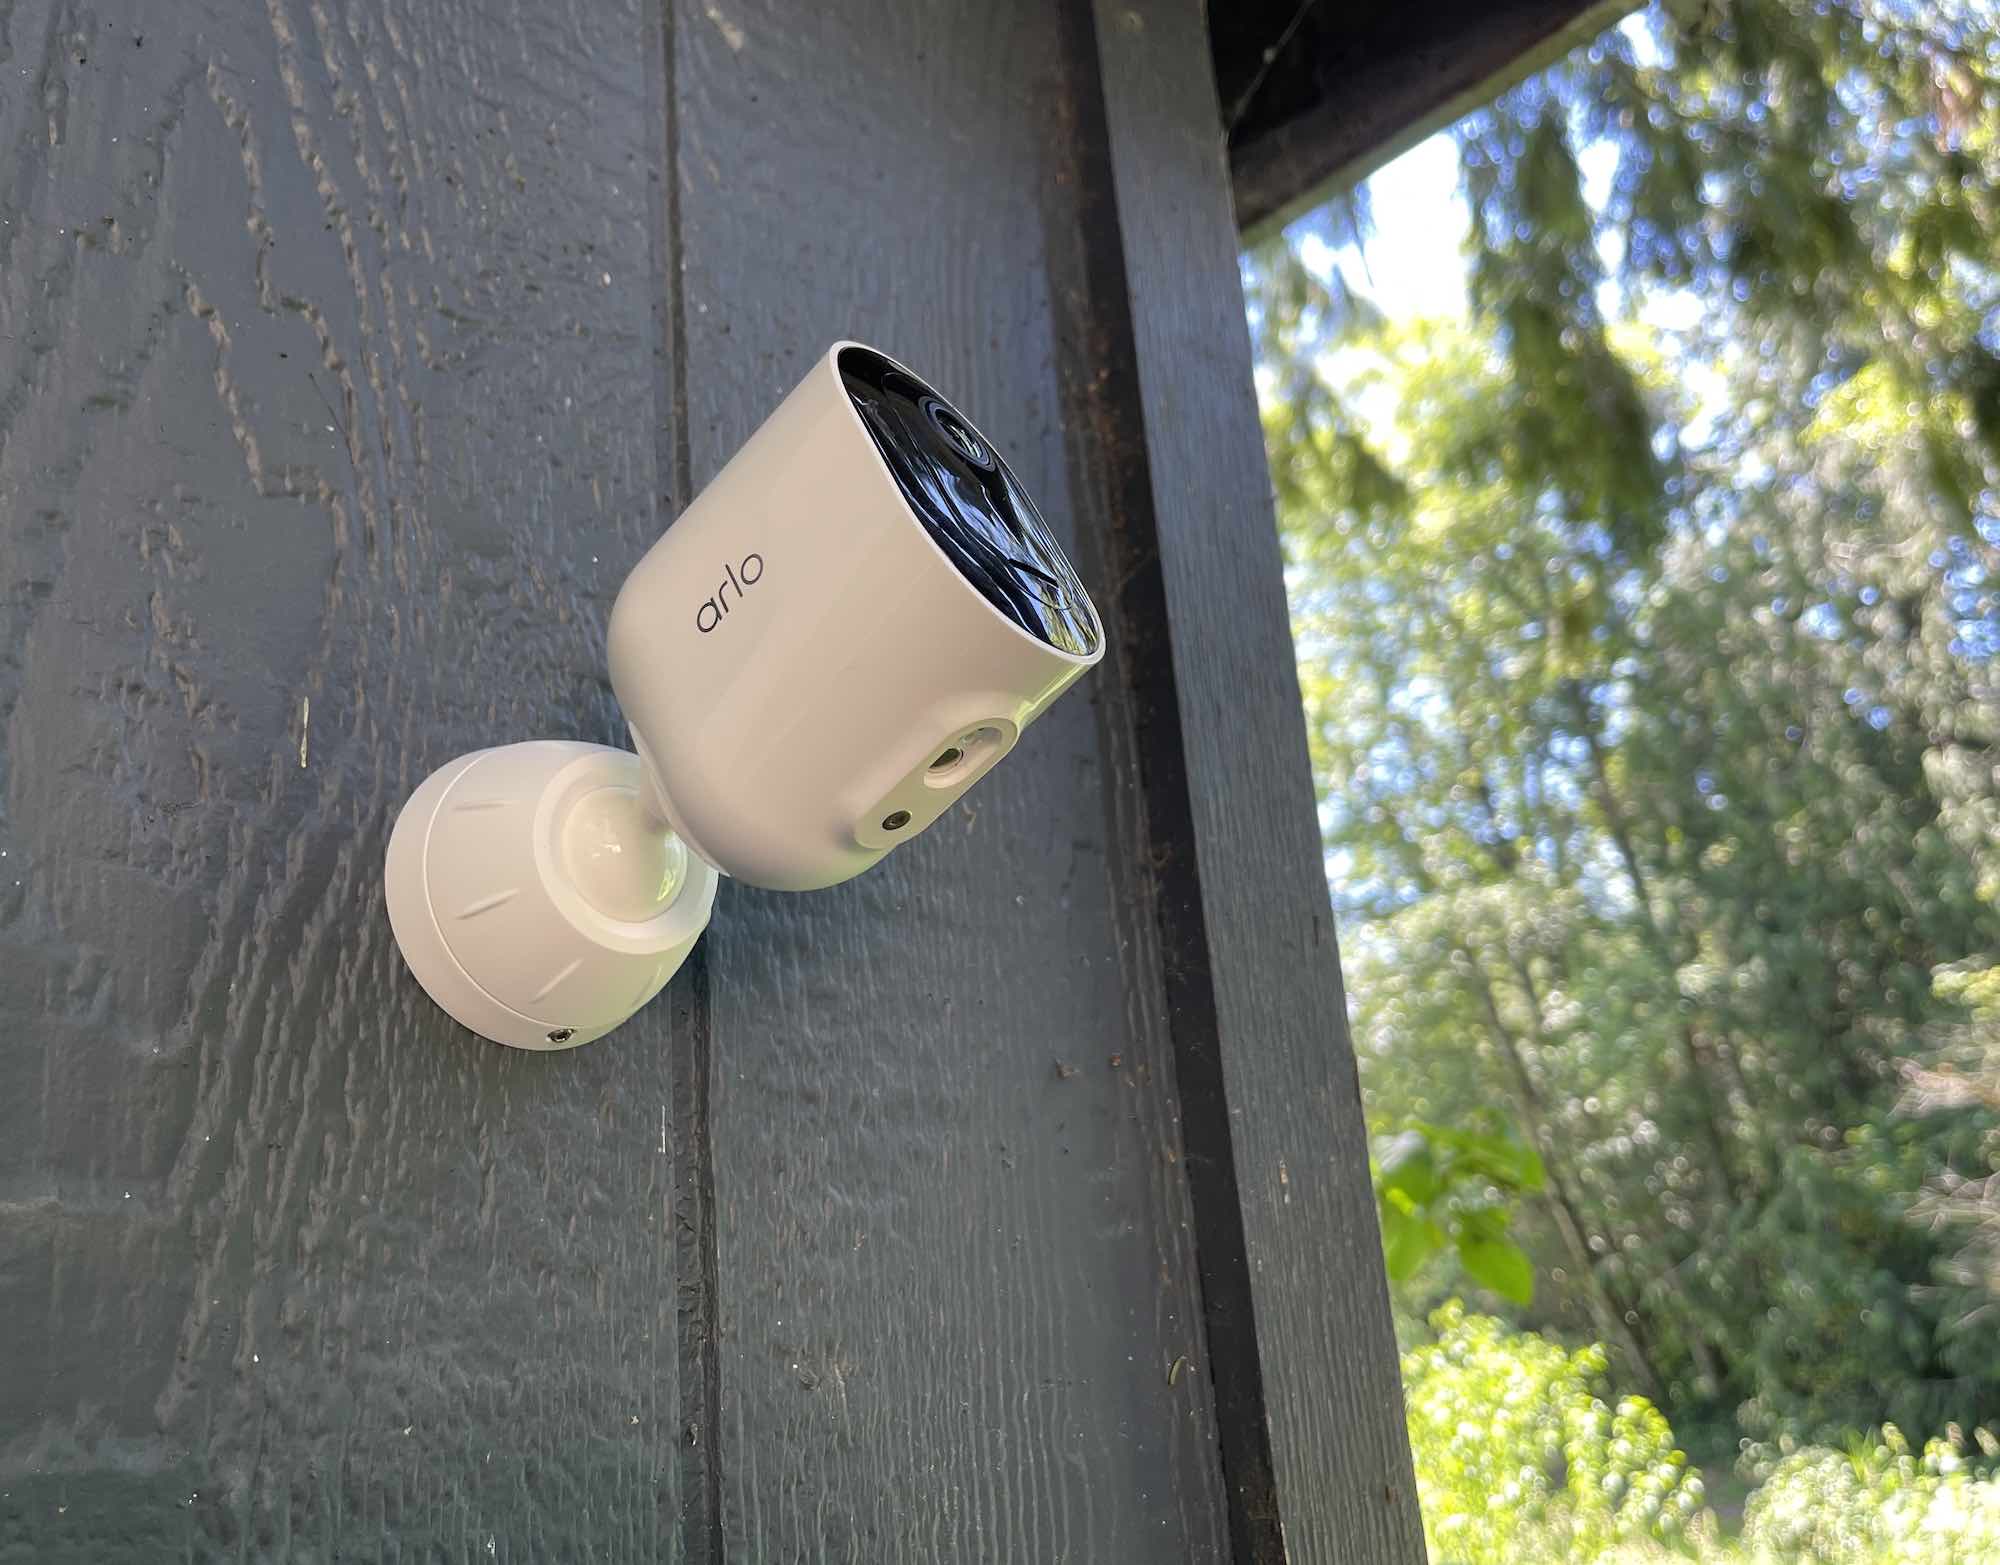 What Is The Max Range For Arlo Pro Motion Detector